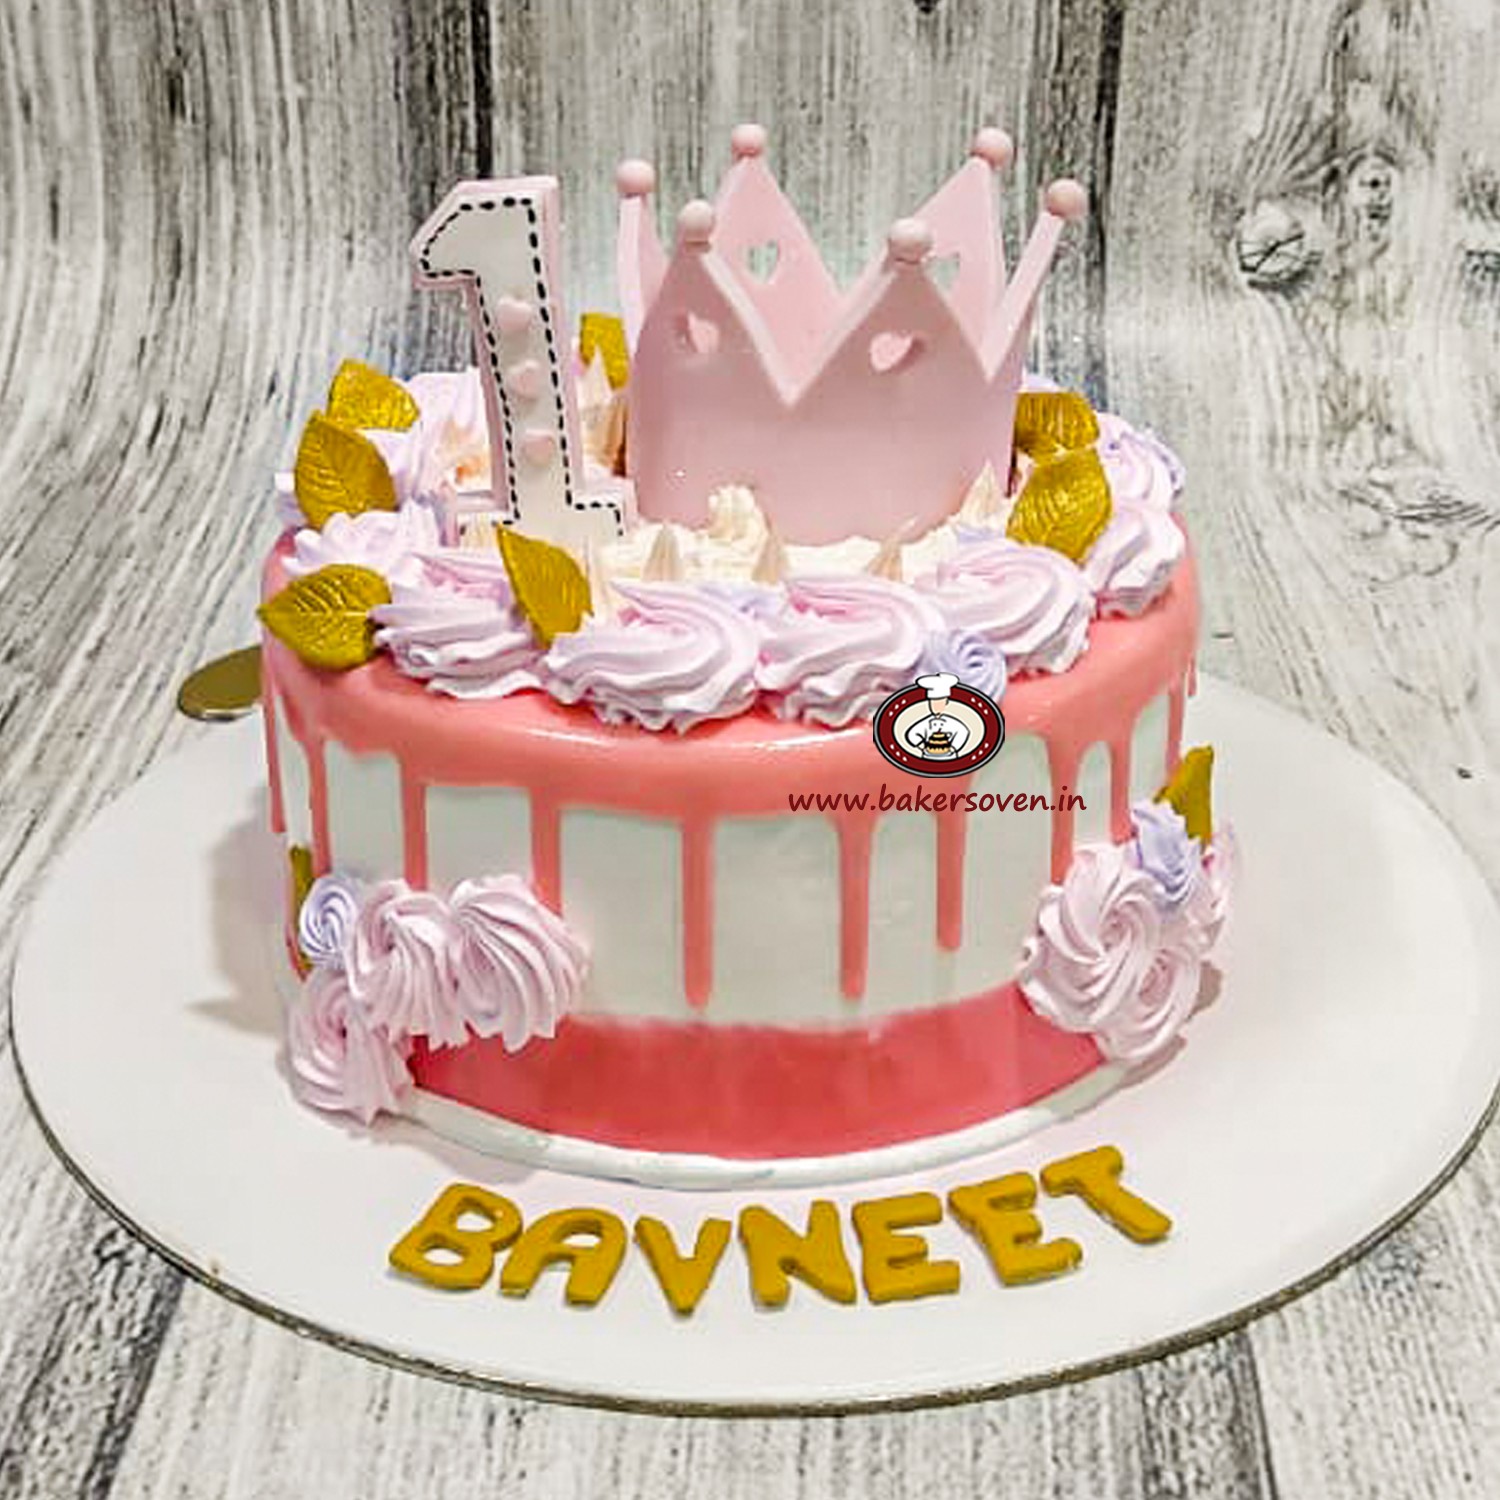 Order Delicious First Year or 1 Year Birthday Cake in Gurgaon Online |  Bakers Oven